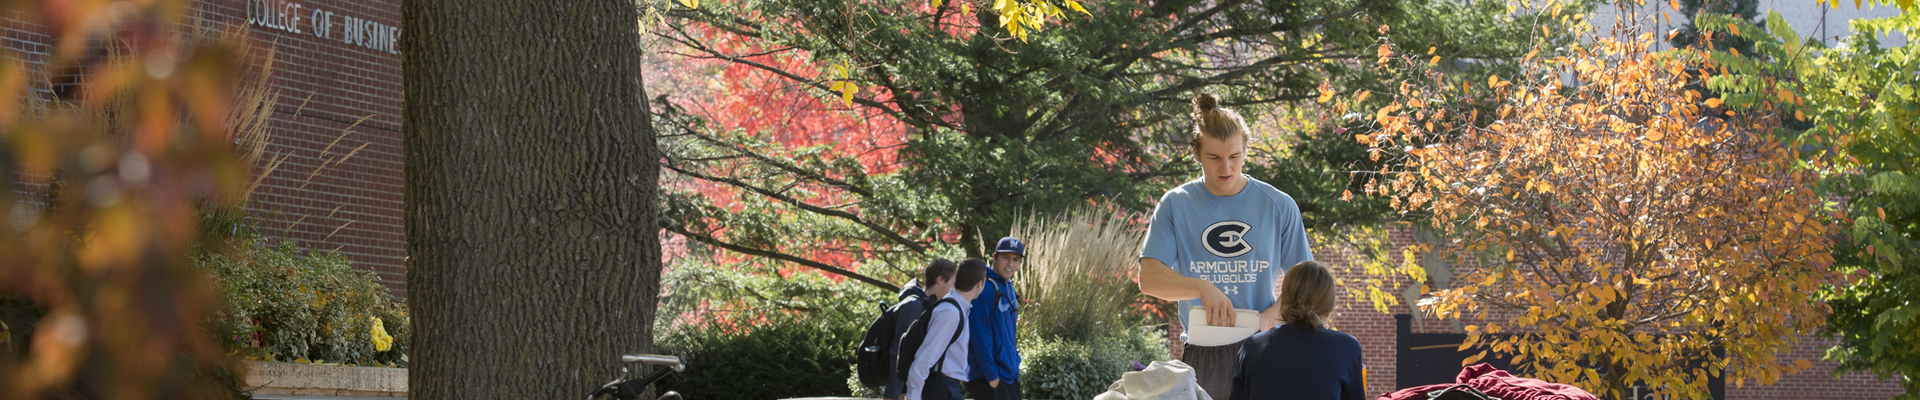 Students outside Schofield by bench in the fall